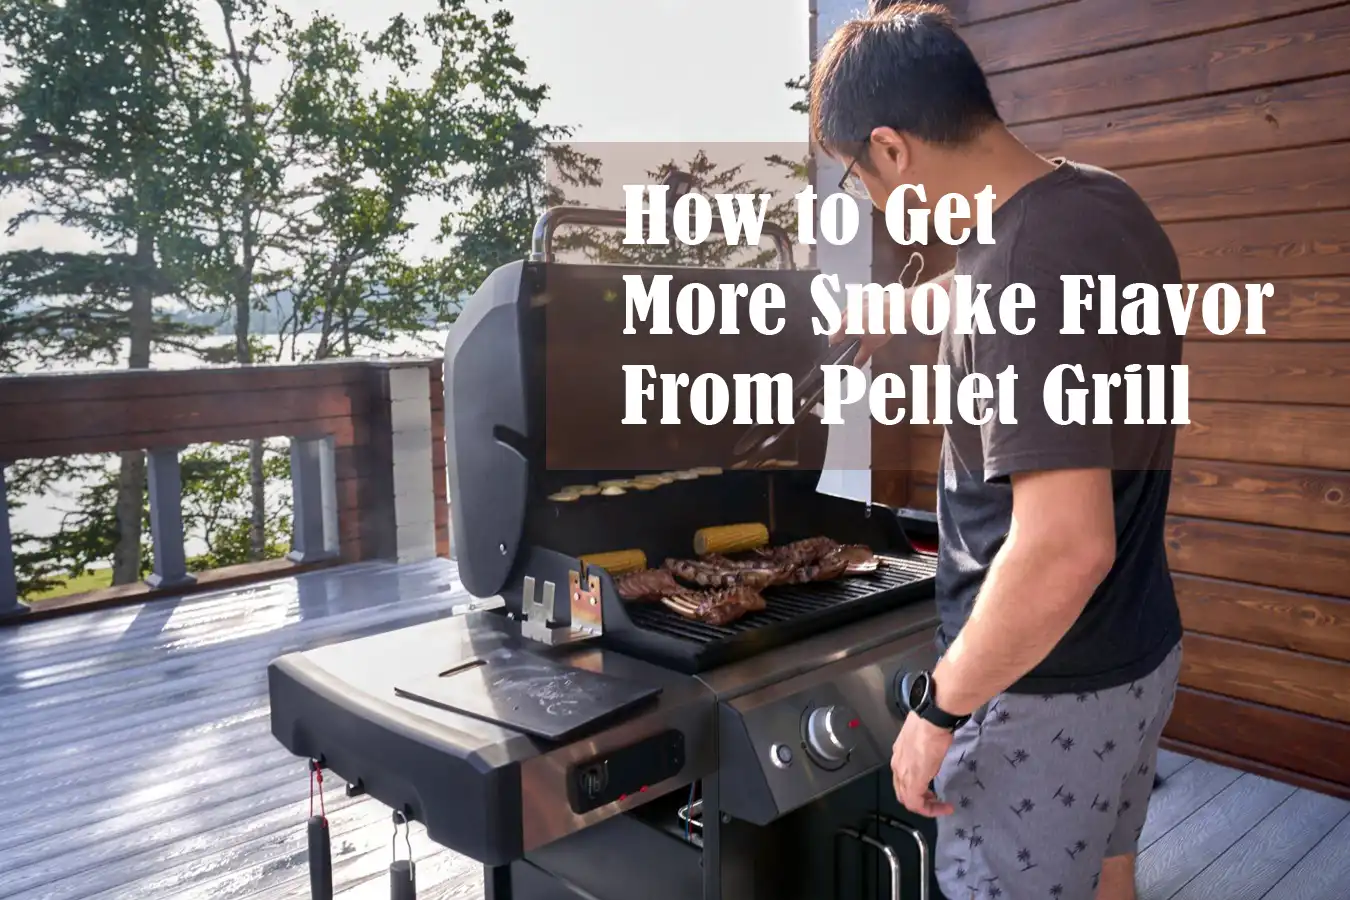 How to Get More Smoke Flavor From Pellet Grill